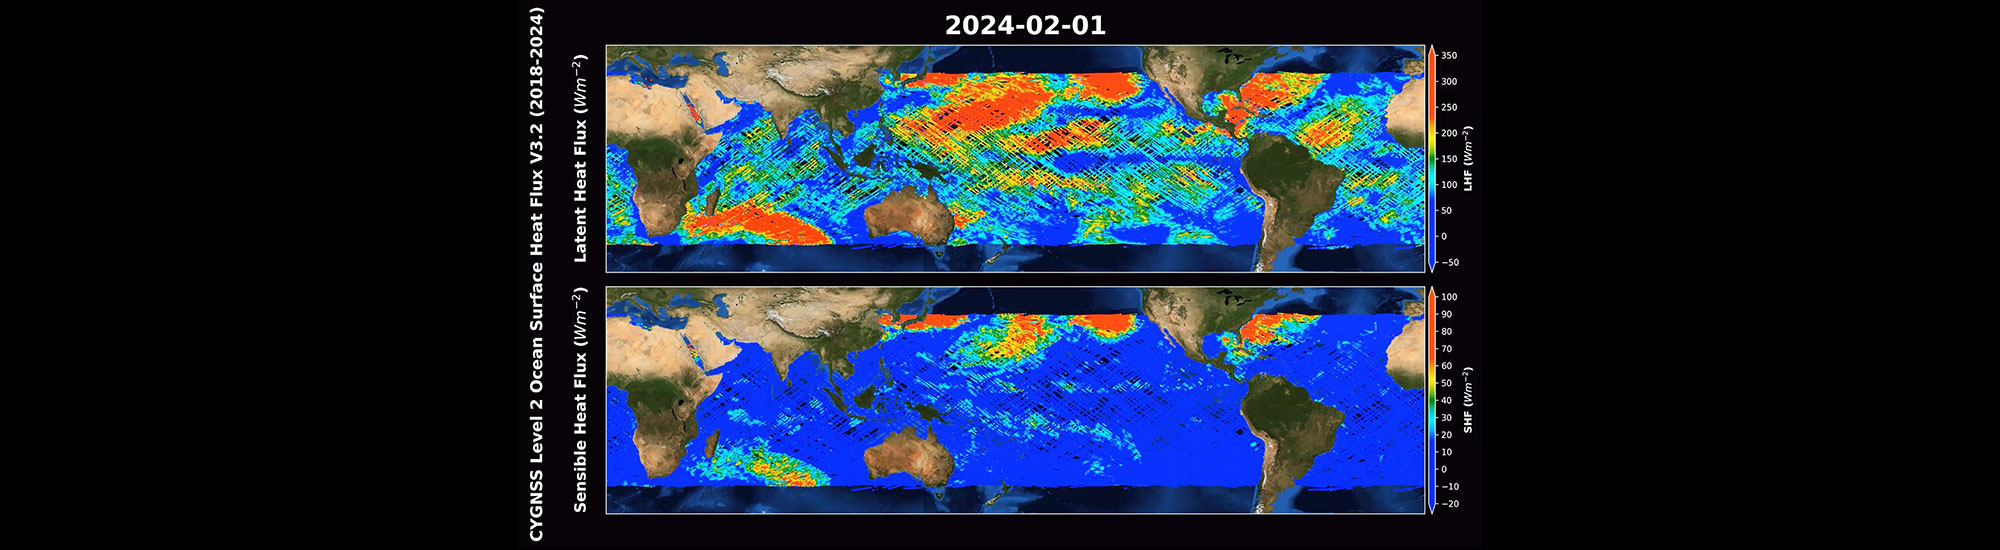 This graphic illustrates information gathered from the CYGNSS L2 Surface Flux V3.2 dataset